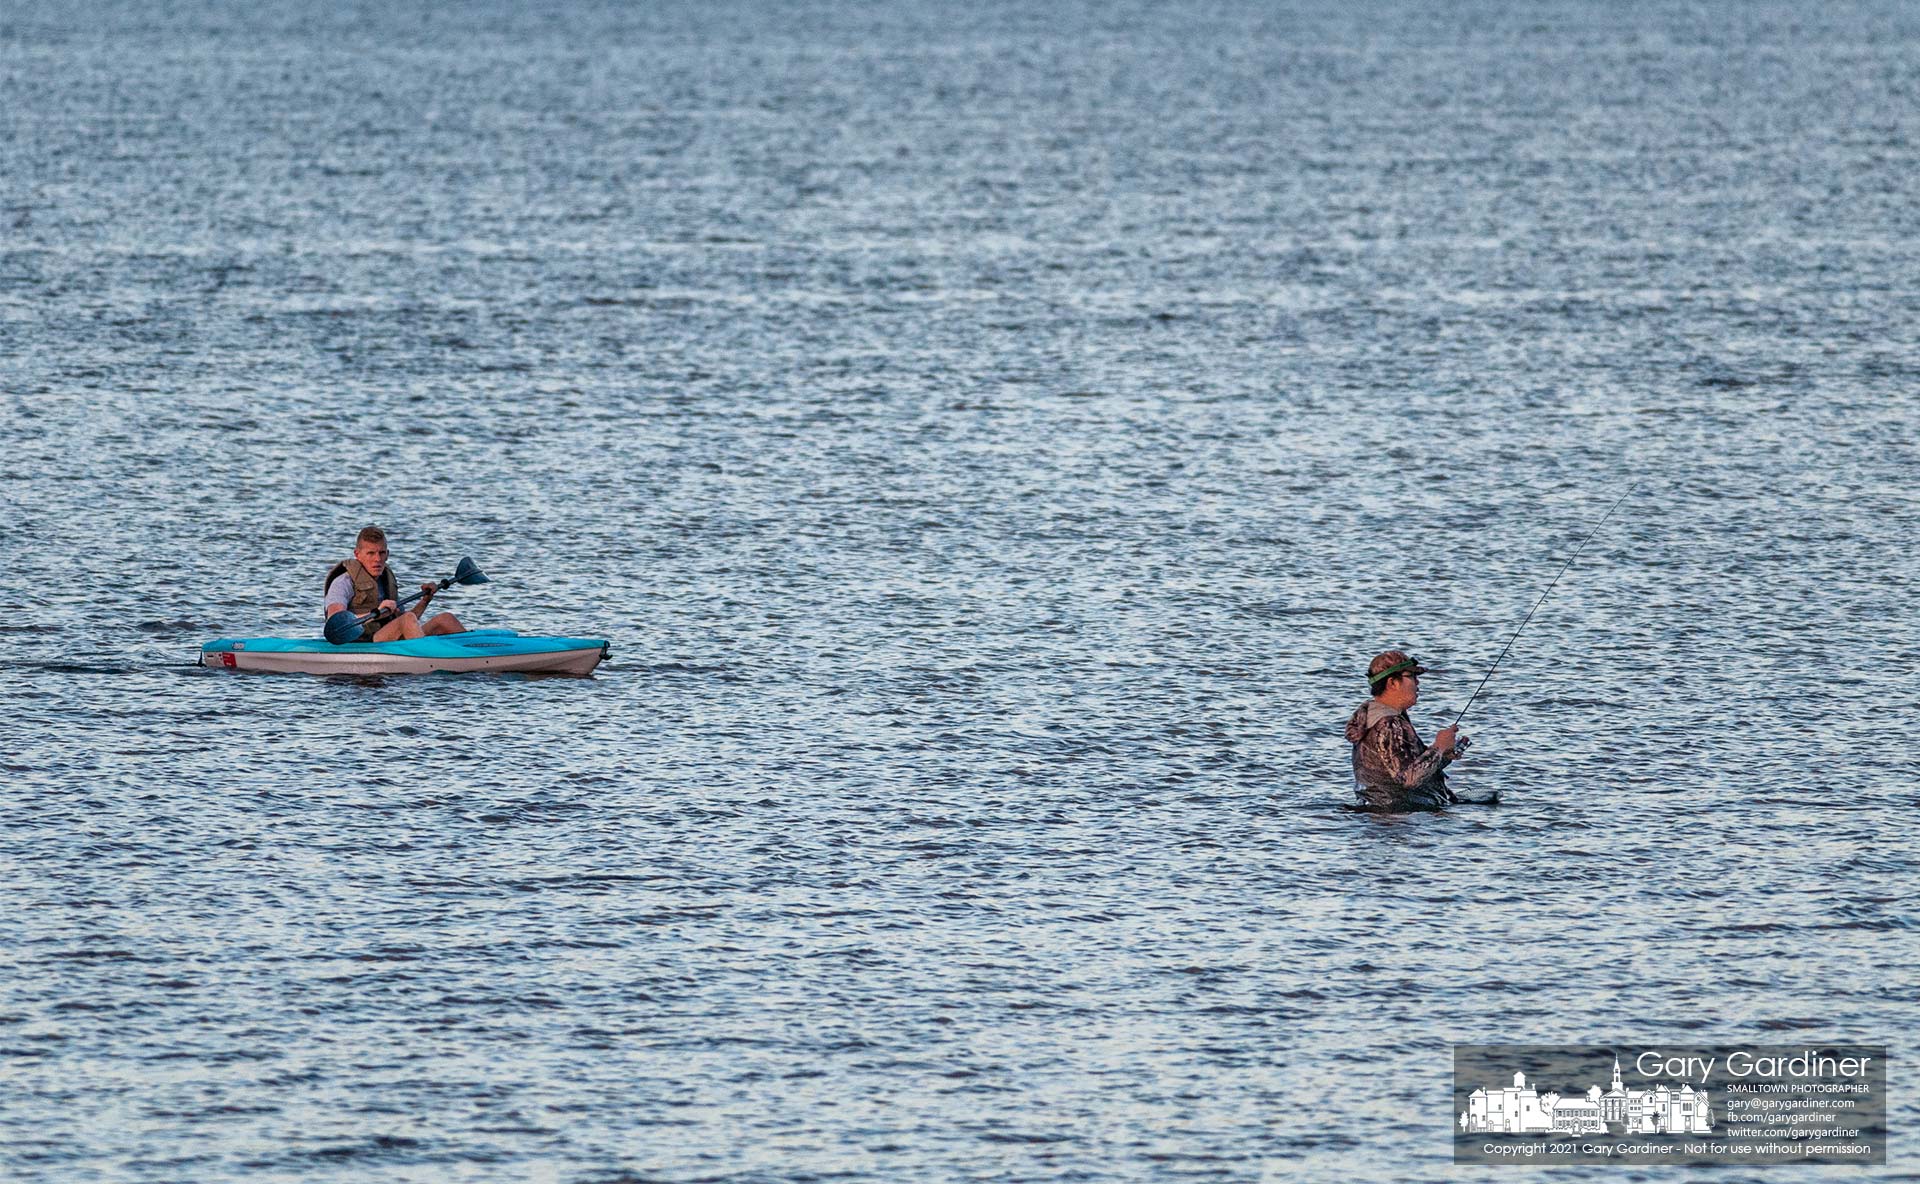 A kayaker wears a quizzical expression as he approaches a fisherman several hundred feet into Hoover Reservoir near the Walnut Street boat ramp. My Final Photo for Sept. 9, 2021.